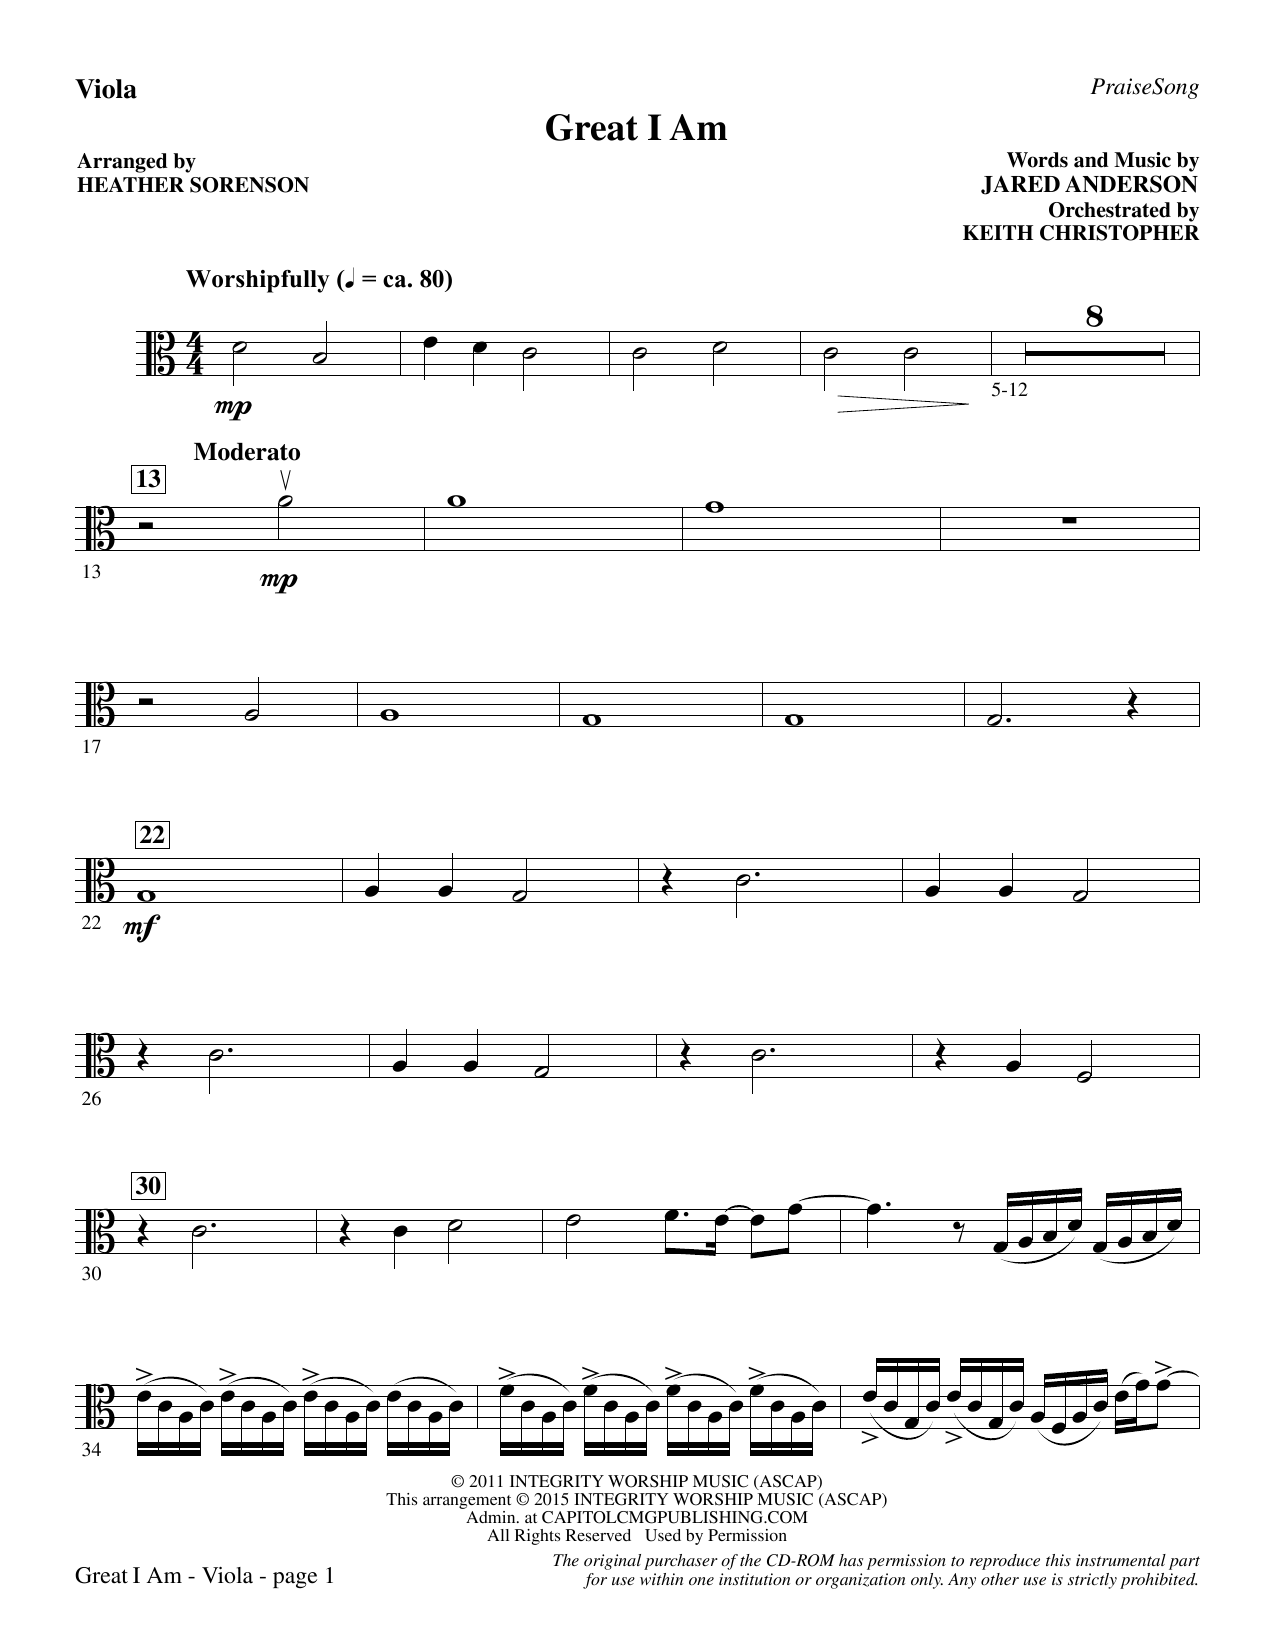 Heather Sorenson Great I Am - Viola sheet music notes and chords. Download Printable PDF.